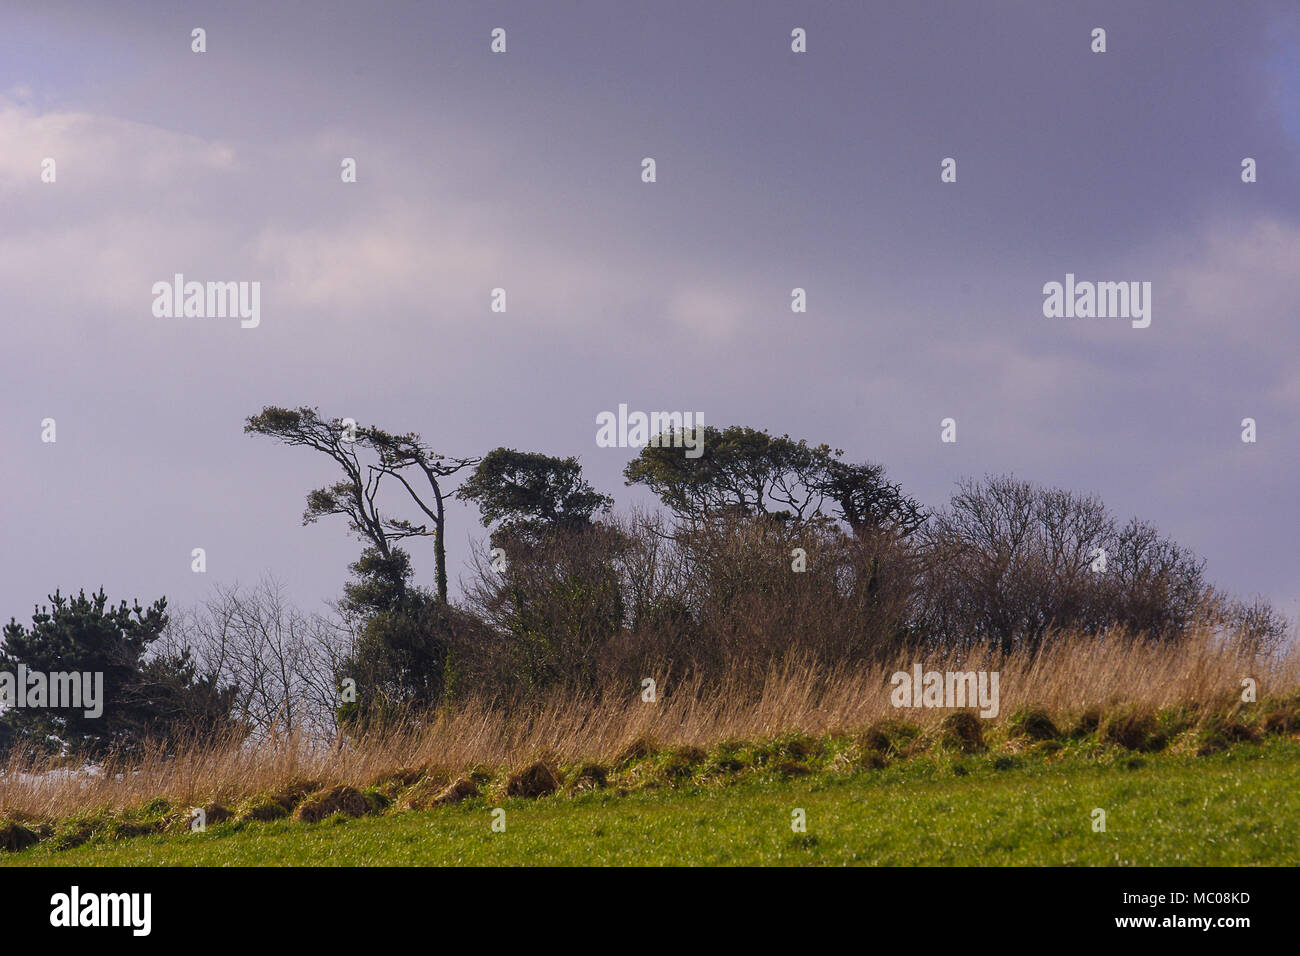 Sweeping line of trees on the crest of a hill, grey overcast skies and long golden grass in foreground Stock Photo